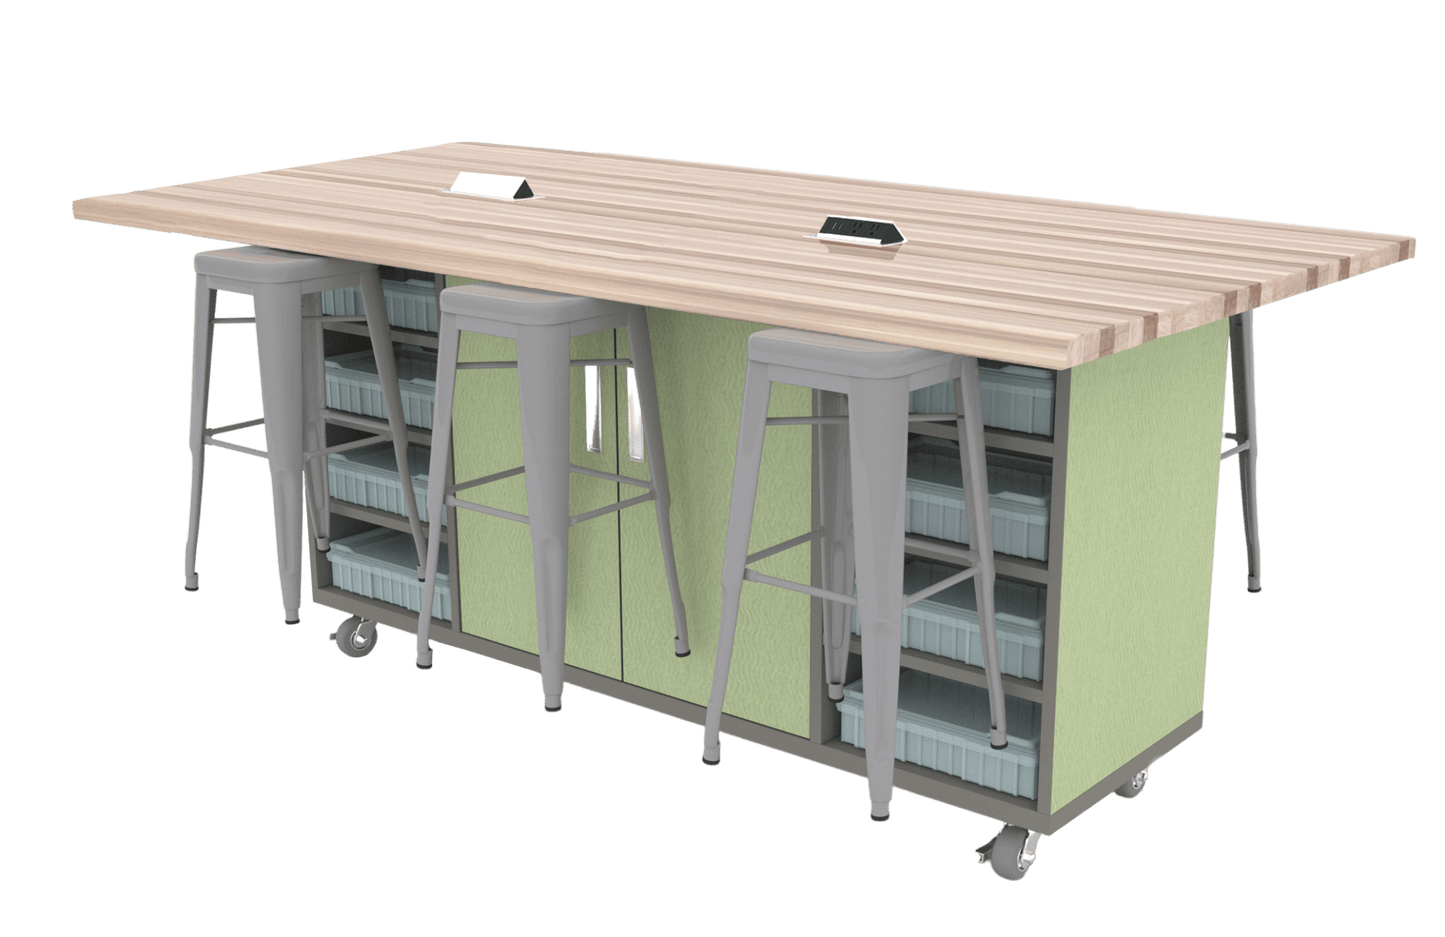 CEF ED Double Table 42"H Butcher Block Top, Laminate Base with 6 Stools, Storage bins, and Electrical Outlets Included. - SchoolOutlet